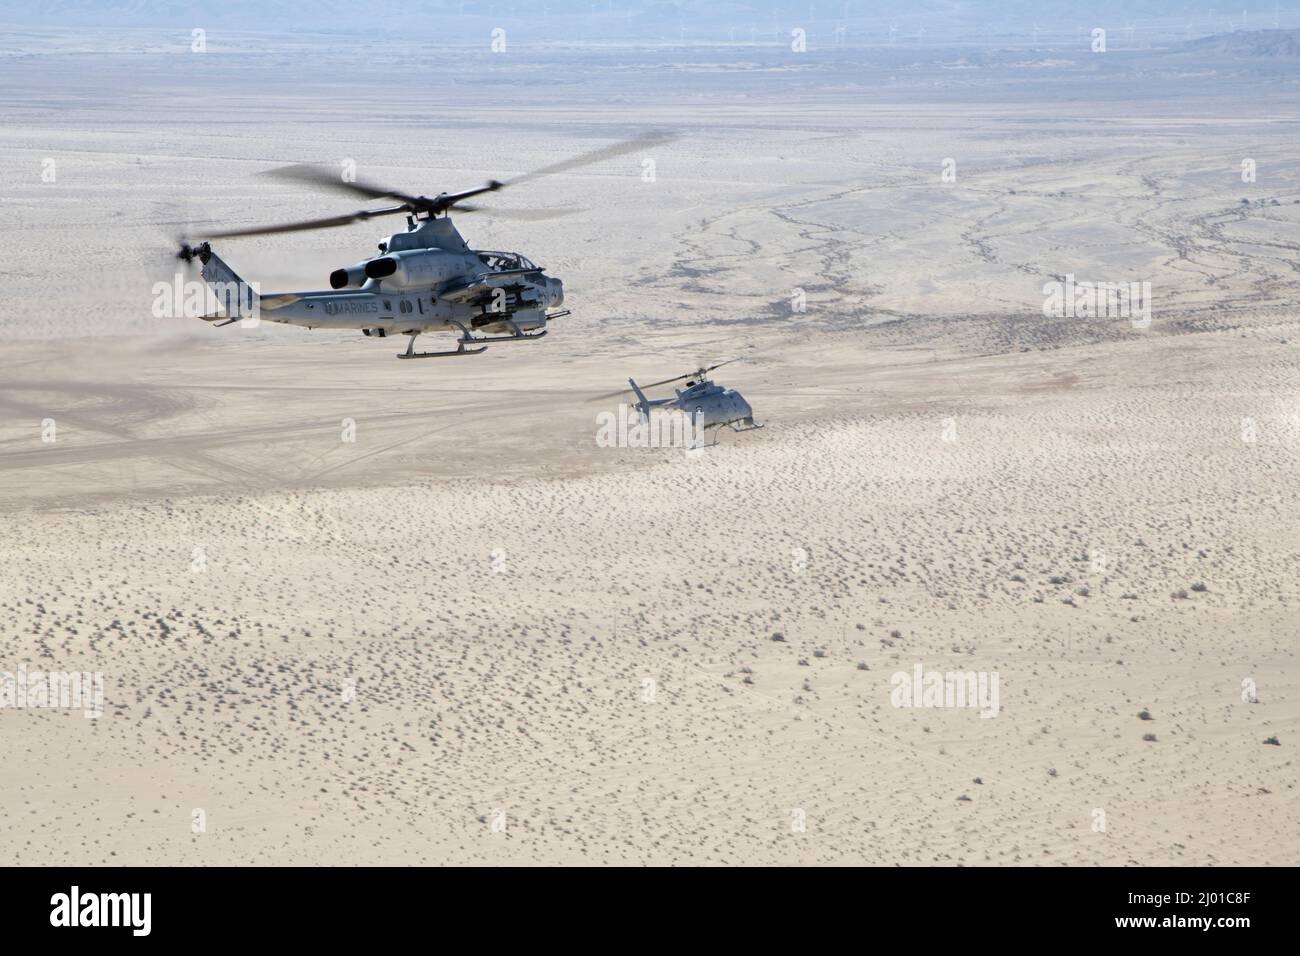 An AH-1Z Viper (left) with Marine Operational and Test Evaluation Squadron 1 (VMX-1), and an MQ-8C Fire Scout unmanned helicopter assigned to Helicopter Sea Combat Squadron 23 (HSC-23), conduct Strike Coordination and Reconnaissance Training near El Centro, California, March 10, 2022. The purpose of this exercise was to provide familiarization and concept development of manned-unmanned teaming. (U.S. Marine Corps photo by Lance Cpl. Jade Venegas) Stock Photo